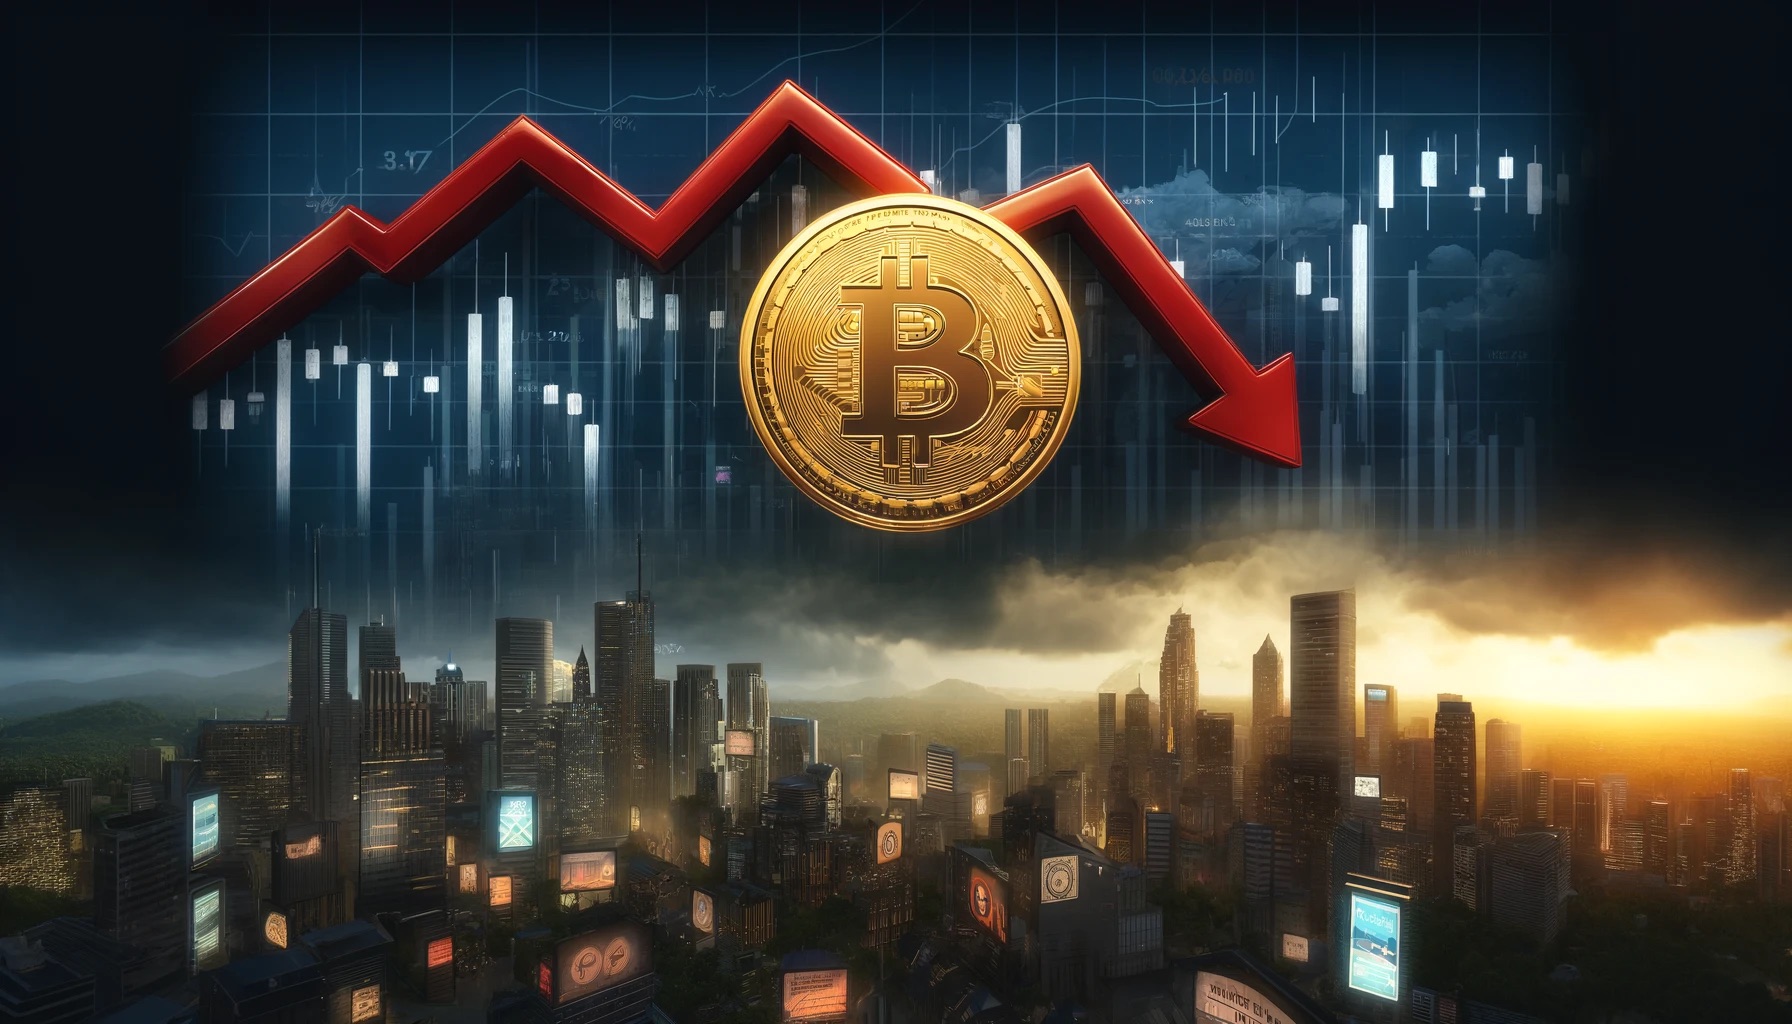 Bitcoin Disappoints With Fall To $67,000, But Analyst Says Investors Should Not Be Fazed. Heres Why